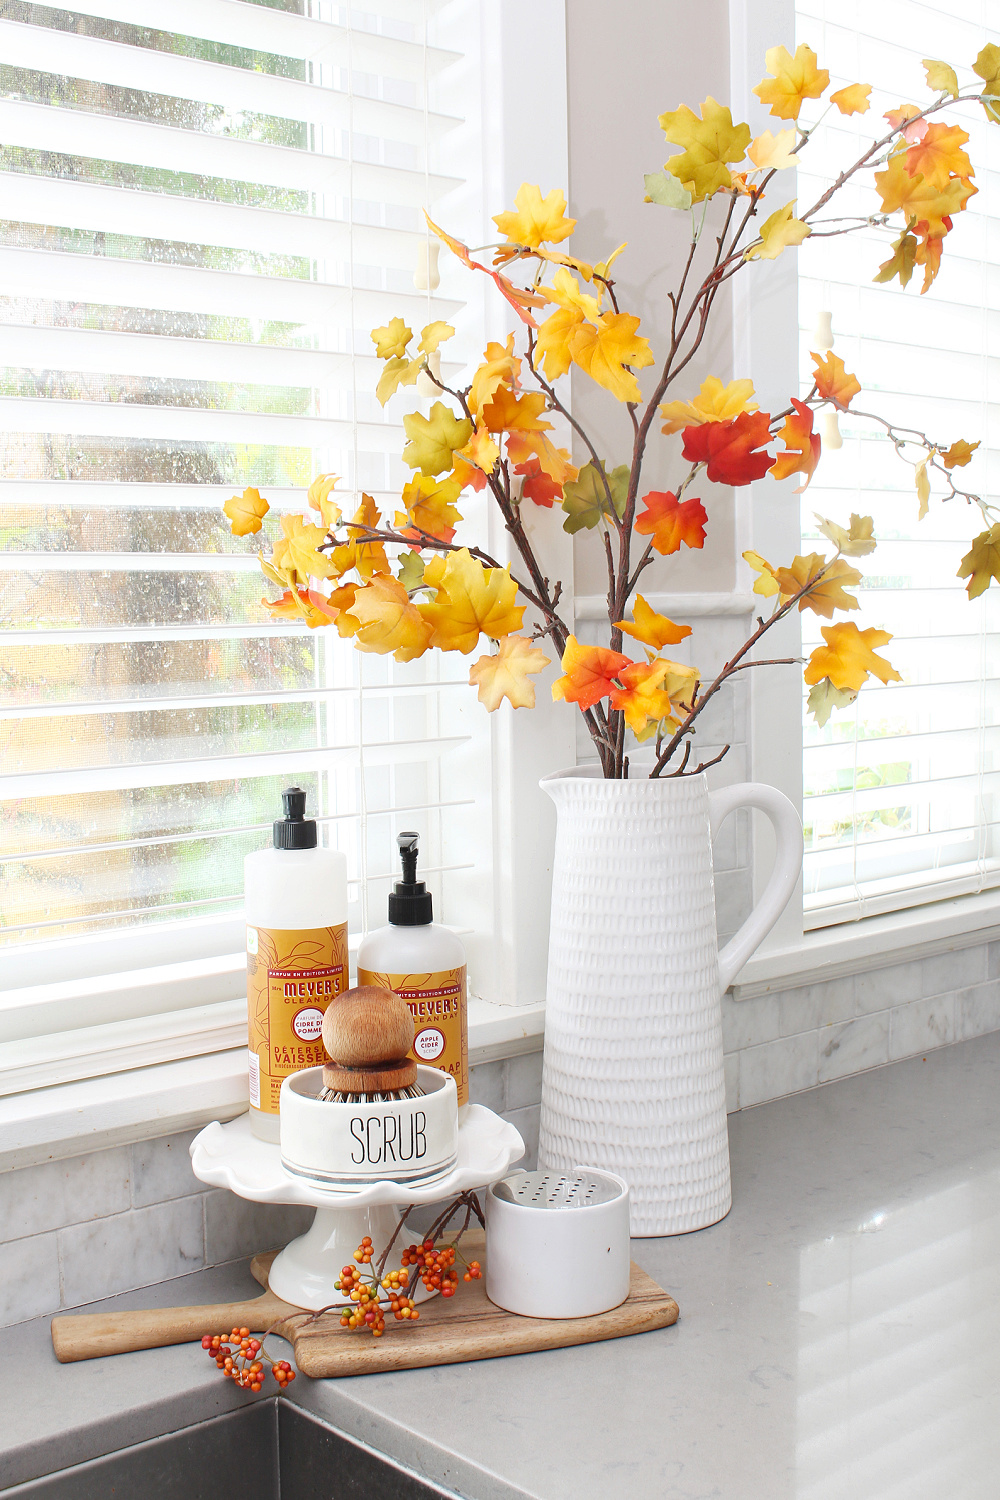 Simple sink decor for a fall kitchen sink.